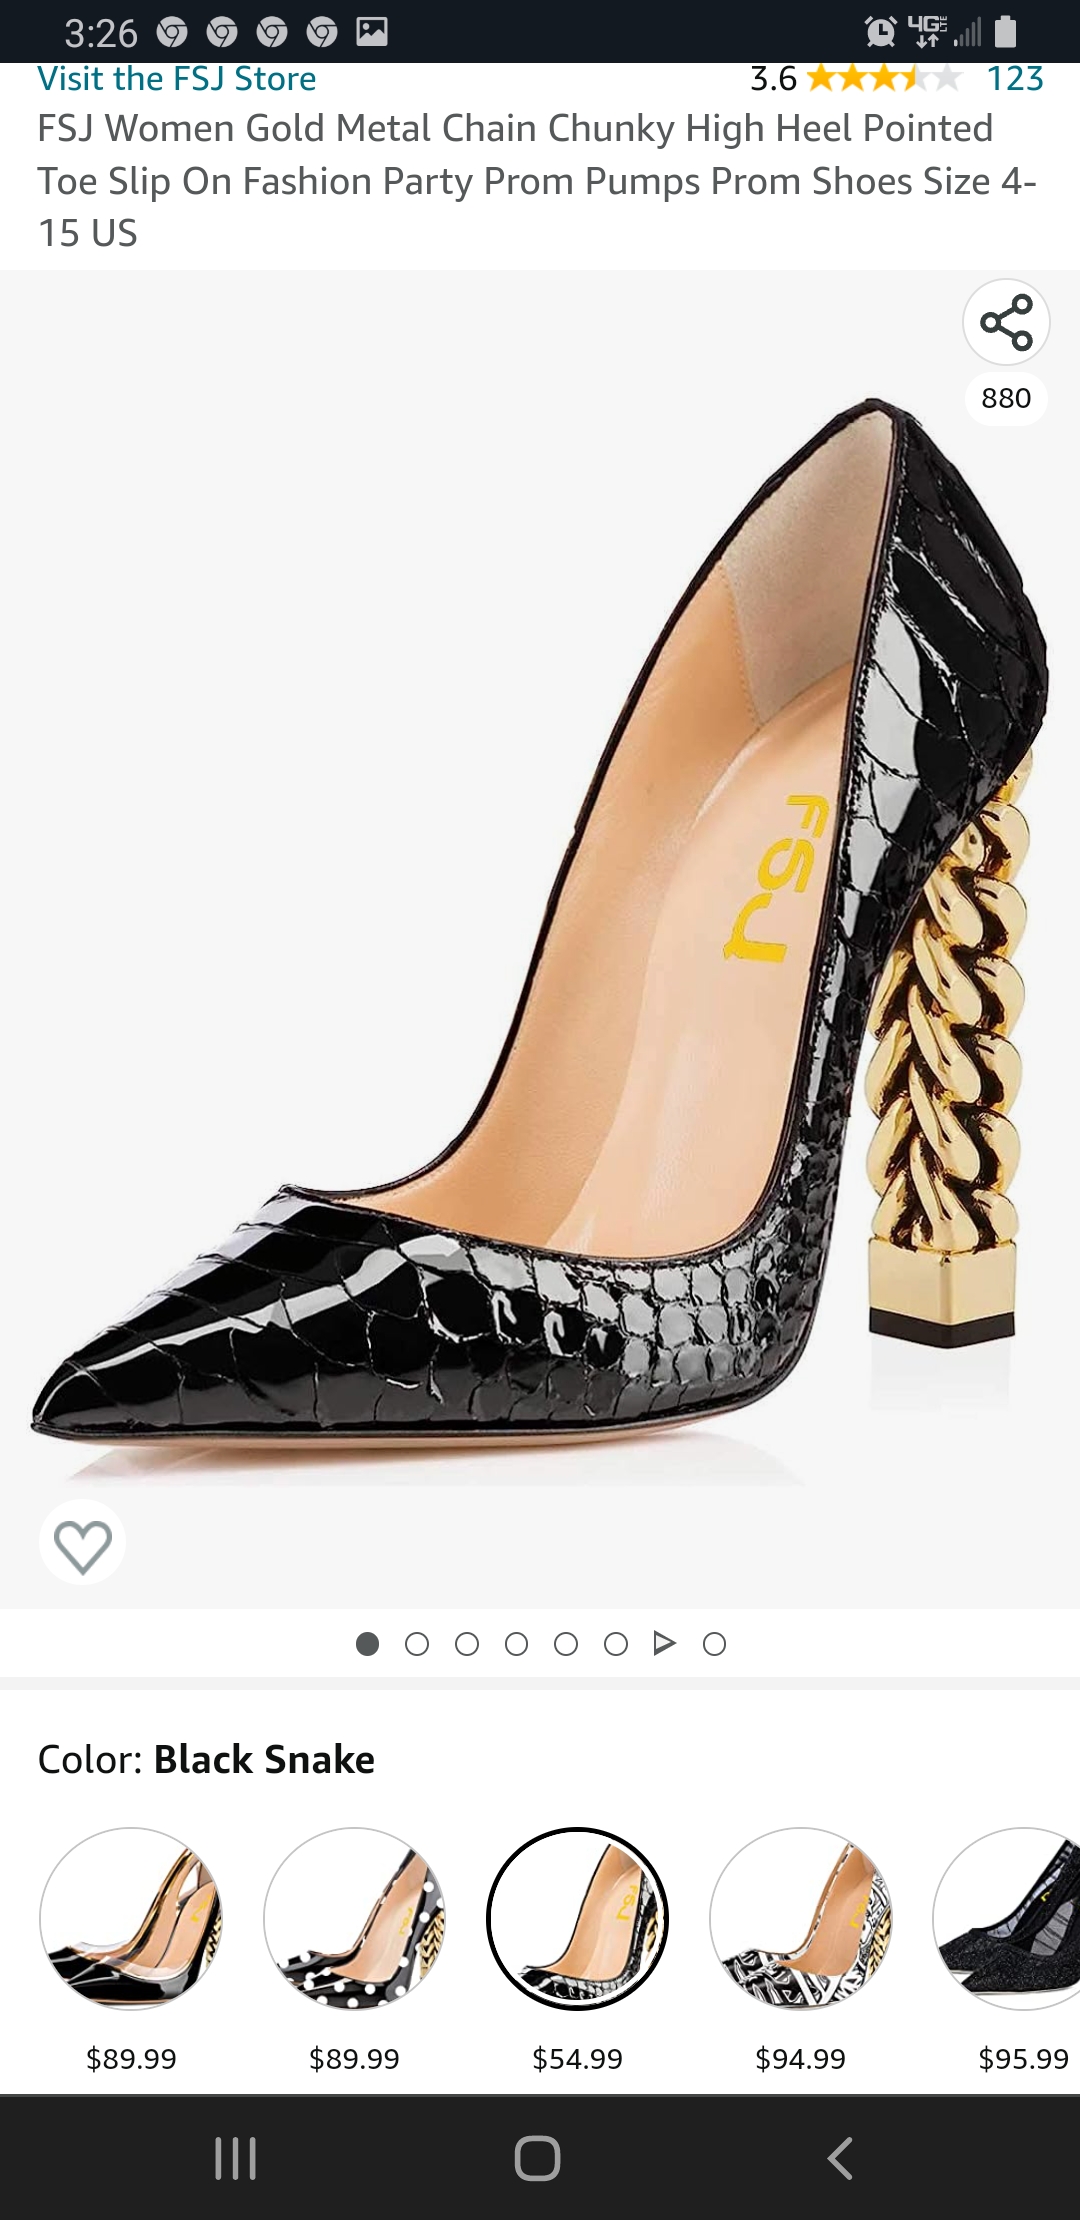 KILN © lo lo Jo ~™

 

Visit the FSJ Store 3.6

123

FSJ Women Gold Metal Chain Chunky High Heel Pointed
Toe Slip On Fashion Party Prom Pumps Prom Shoes Size 4-

15 US

 

Color: Black Snake

~

5, oe f

$89.99 $89.99 $54.99 $94.99

11 @)

Be

53

 

   

<

 

 

$95.99